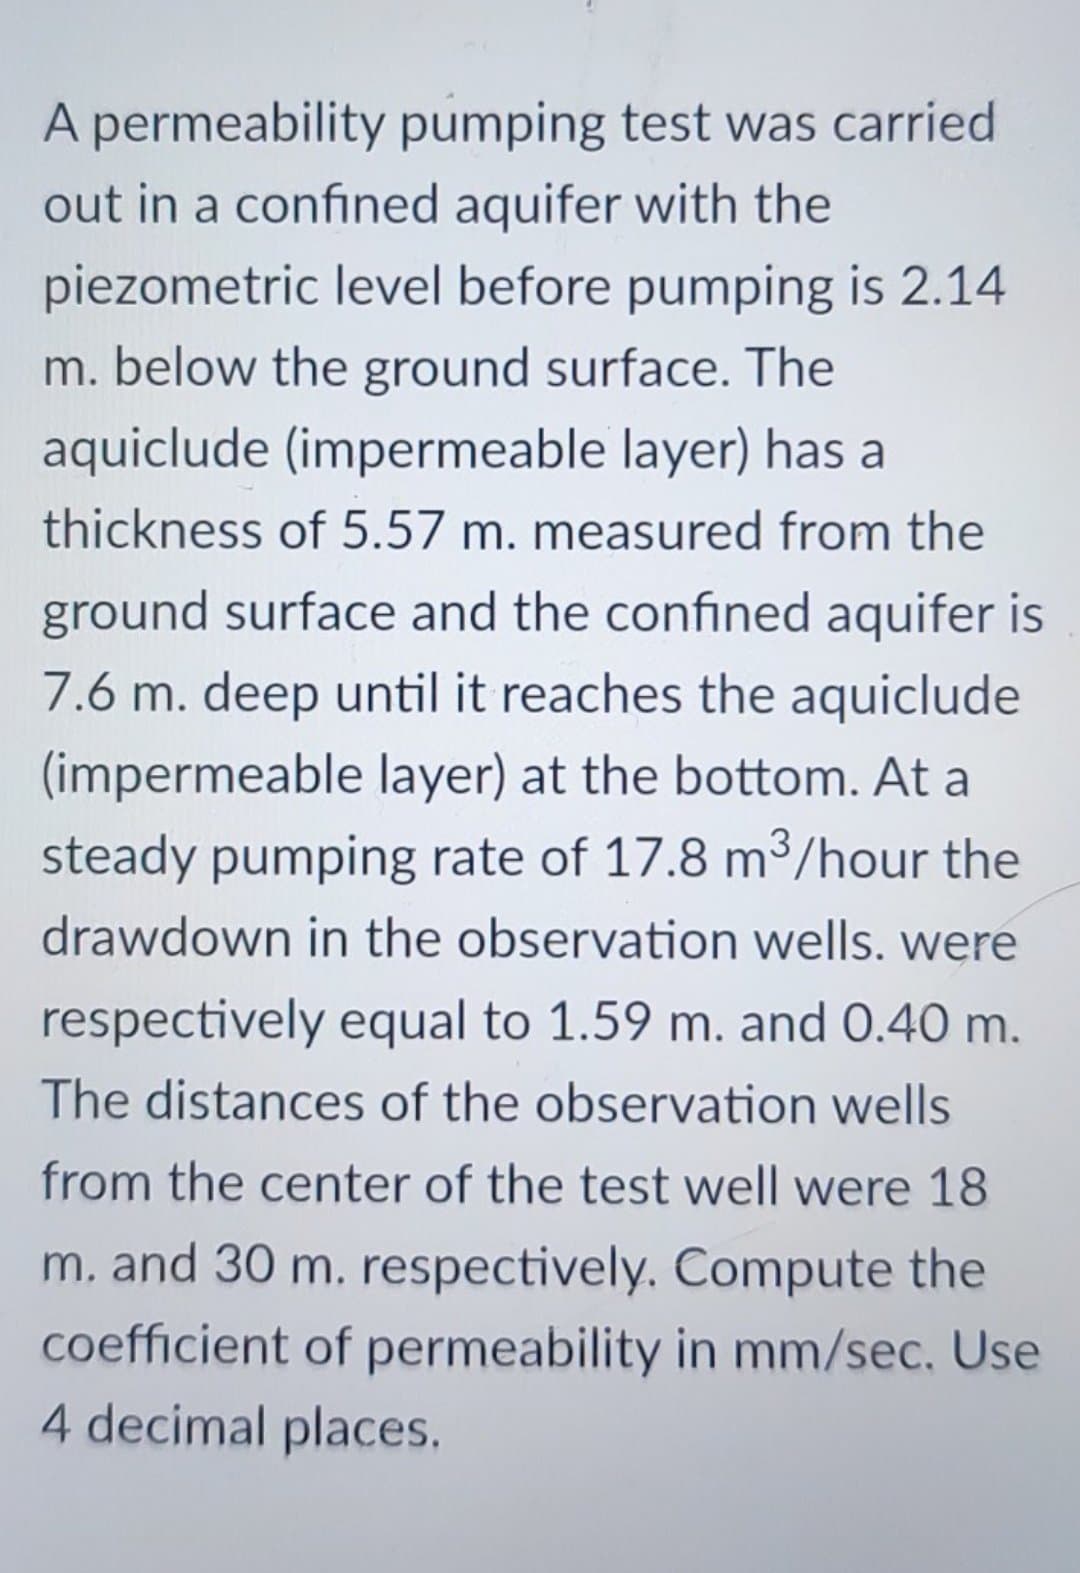 A permeability pumping test was carried
out in a confined aquifer with the
piezometric level before pumping is 2.14
m. below the ground surface. The
aquiclude (impermeable layer) has a
thickness of 5.57 m. measured from the
ground surface and the confined aquifer is
7.6 m. deep until it reaches the aquiclude
(impermeable layer) at the bottom. At a
steady pumping rate of 17.8 m³/hour the
drawdown in the observation wells. were
respectively equal to 1.59 m. and 0.40 m.
The distances of the observation wells
from the center of the test well were 18
m. and 30 m. respectively. Compute the
coefficient of permeability in mm/sec. Use
4 decimal places.